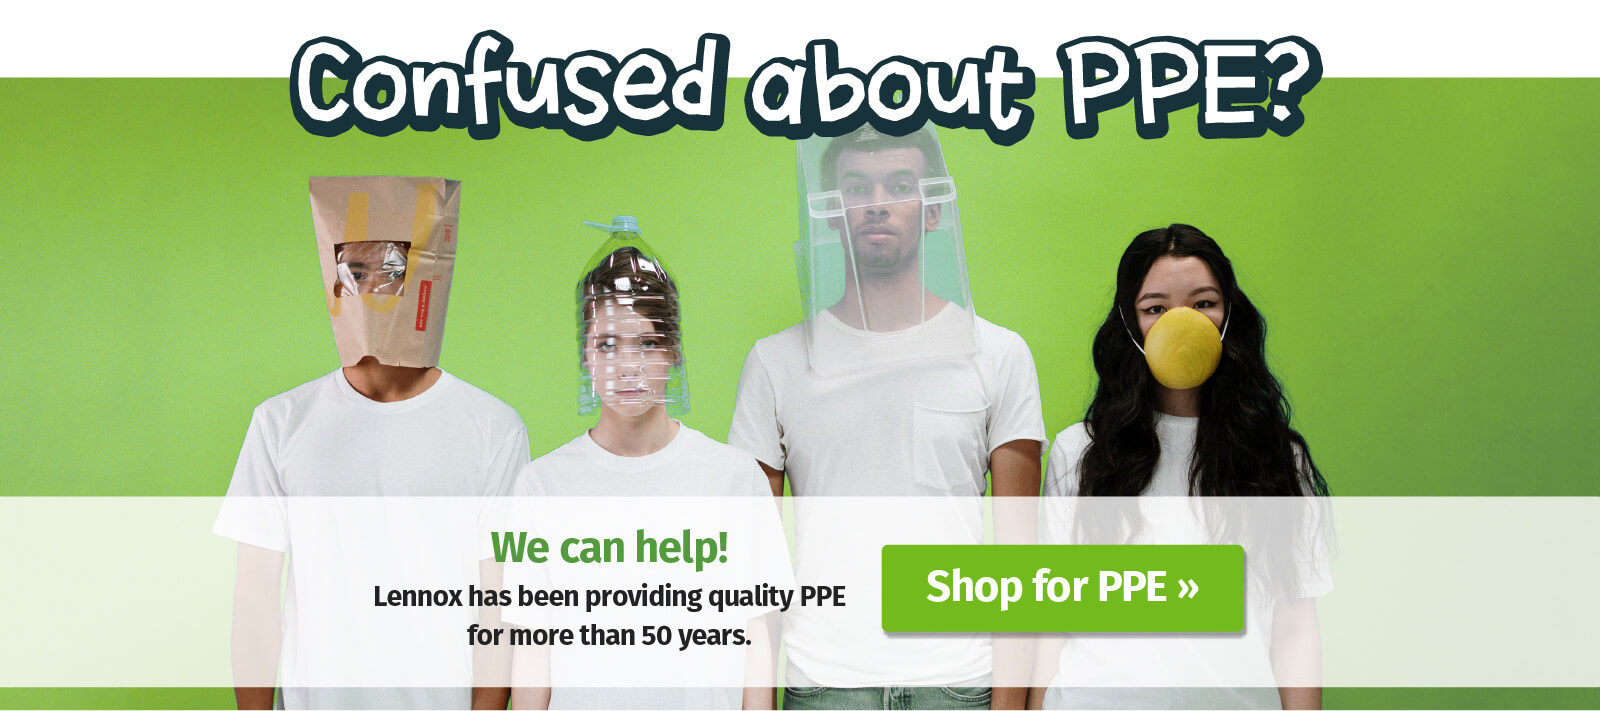 shop for PPE